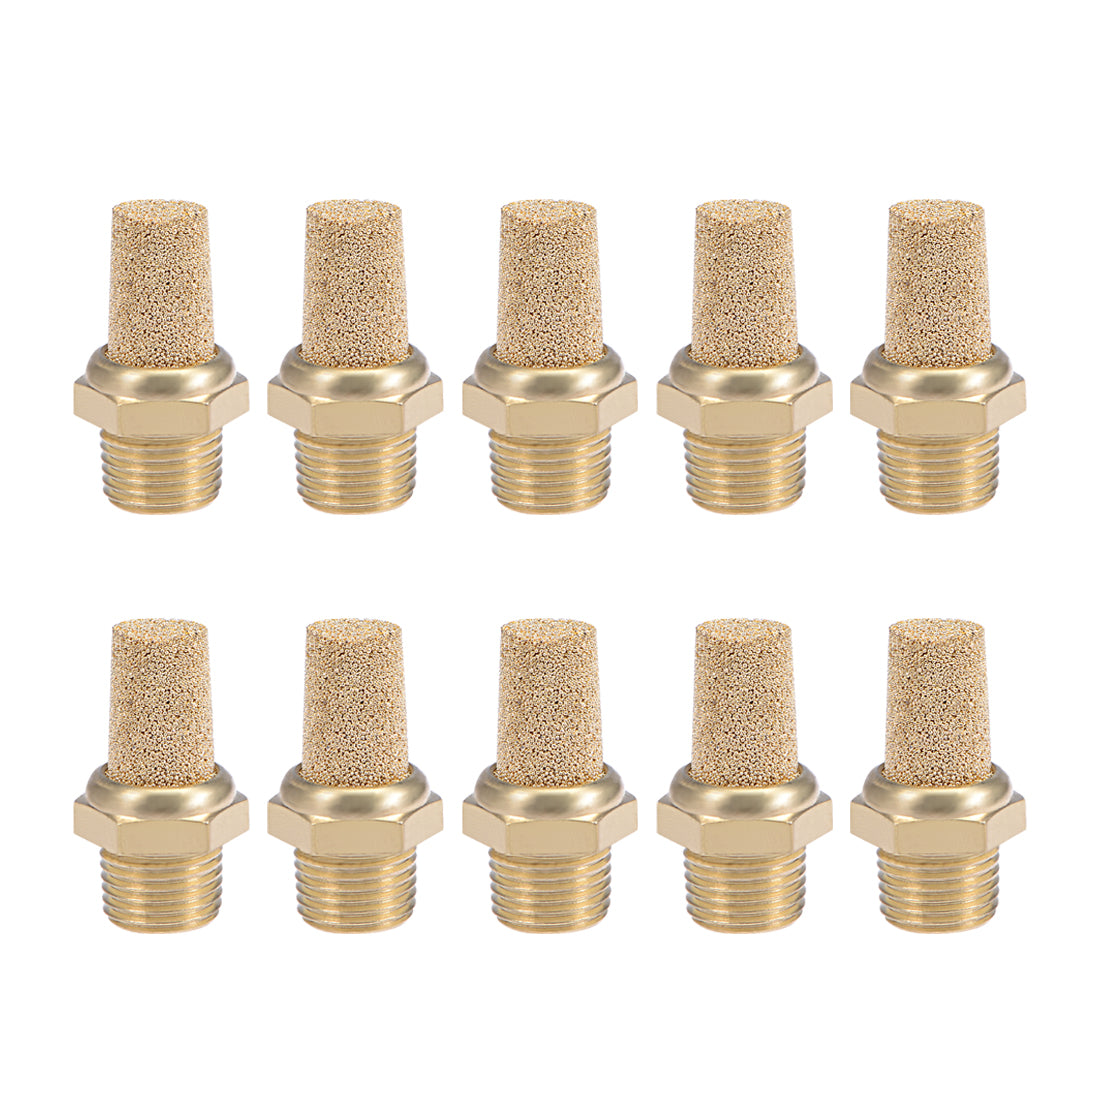 uxcell Uxcell 1/8 PT Sintered Bronze Exhaust Muffler with Brass Body Protruding 10pcs